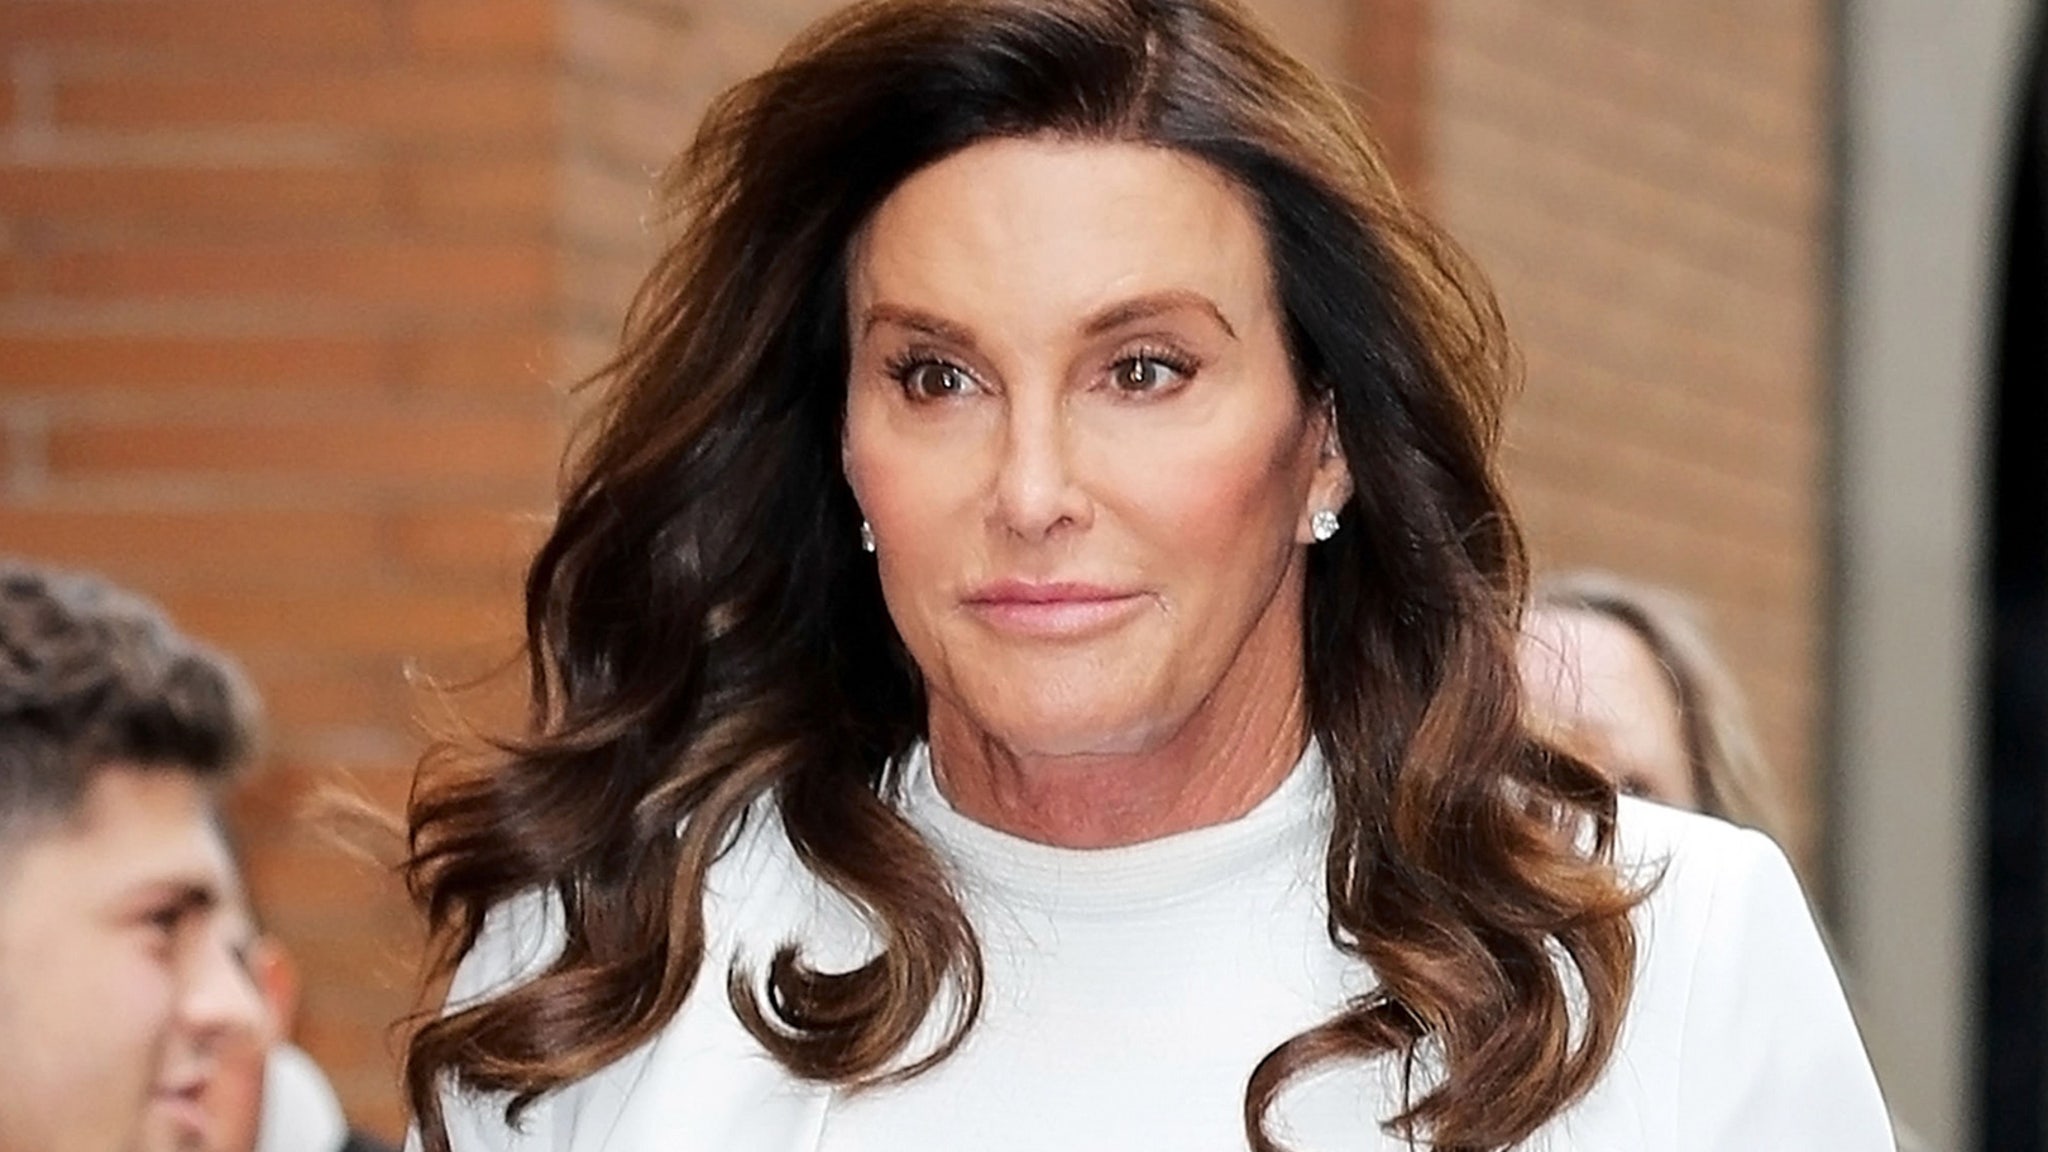 5 Things We Learned From Caitlyn Jenner's Media Blitz